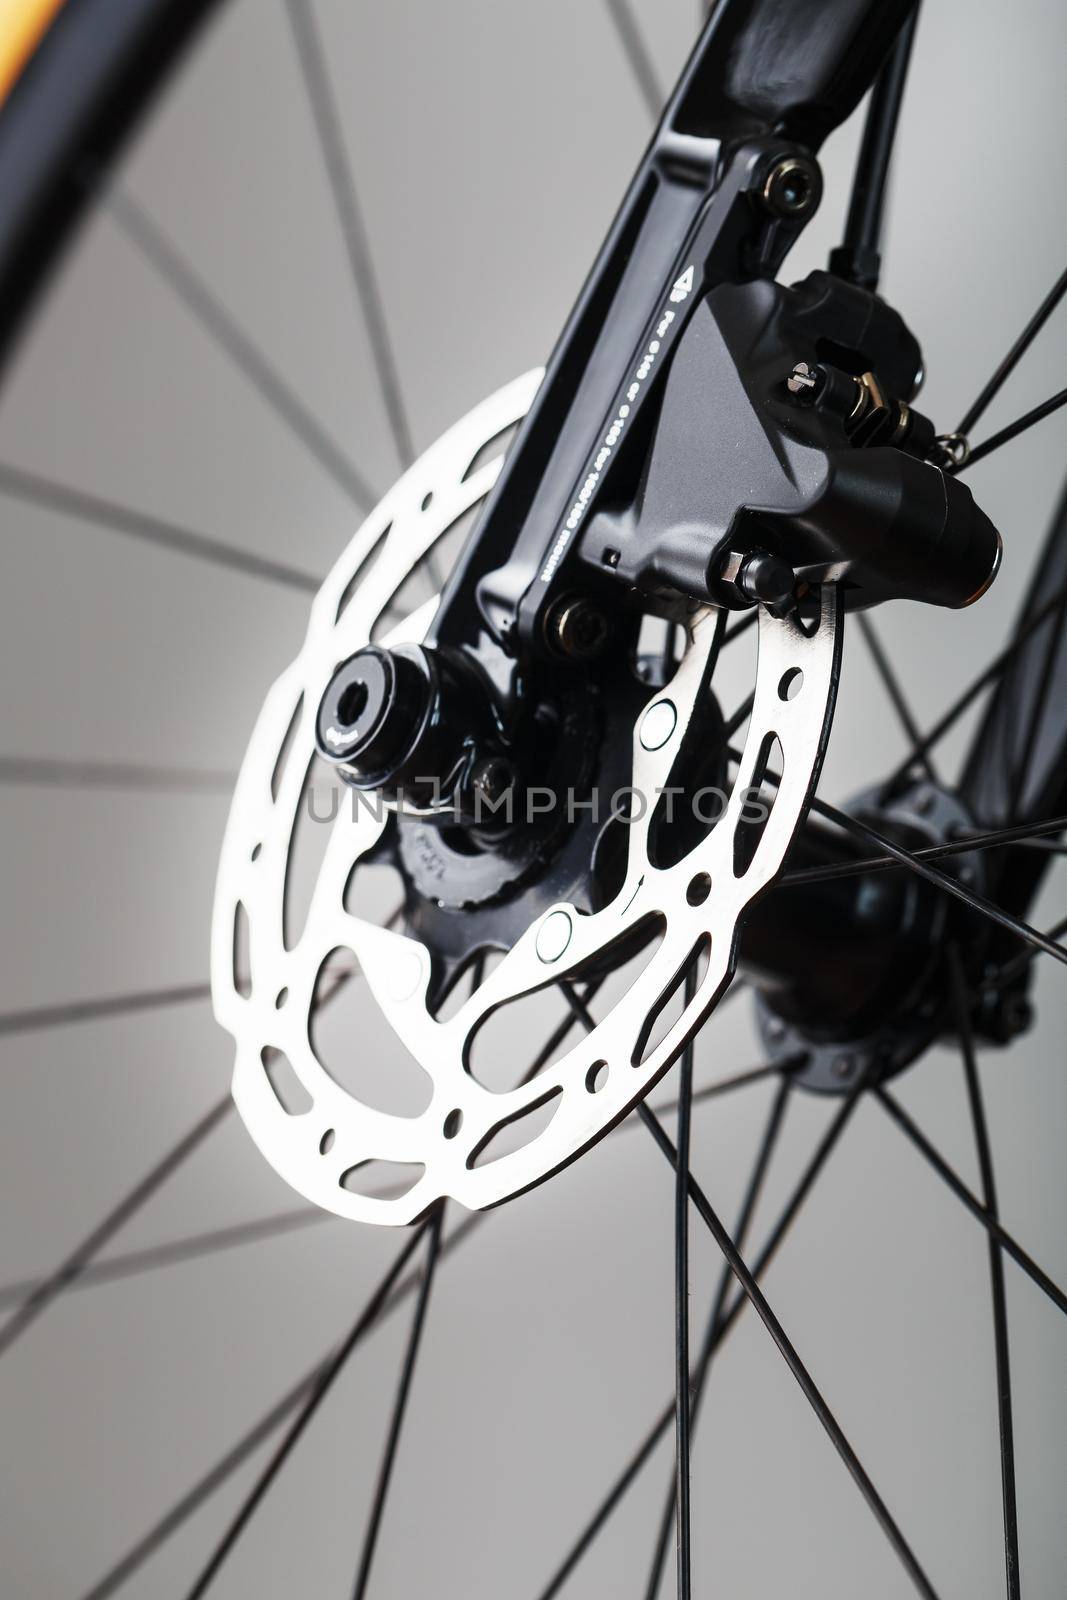 Bicycle brake rotor with hydraulic caliper. Brake system on a gravel bike by AlexGrec